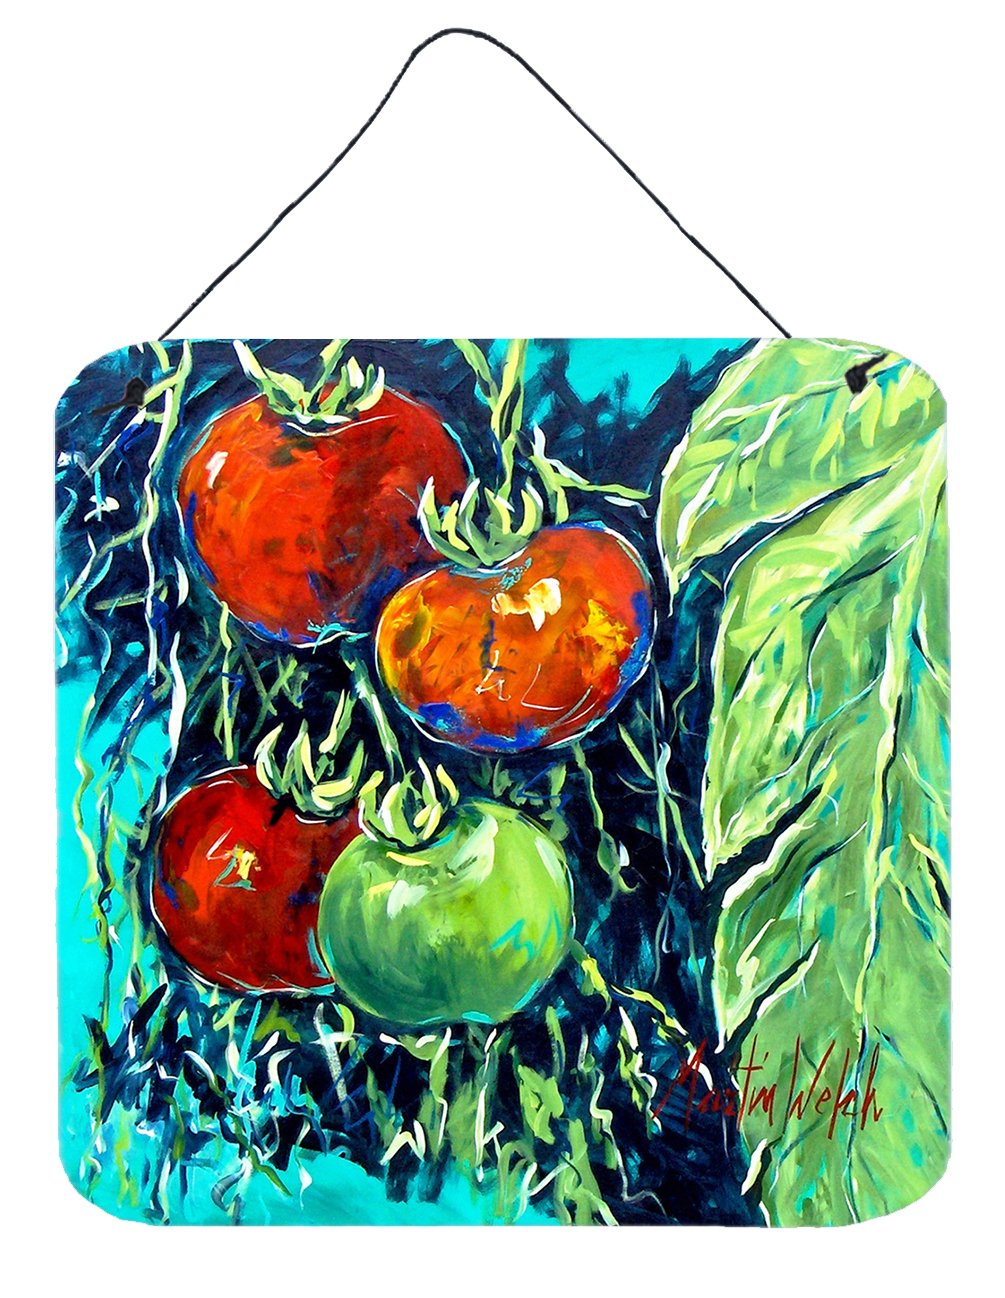 Tomatoe Tomato Wall or Door Hanging Prints MW1359DS66 by Caroline's Treasures